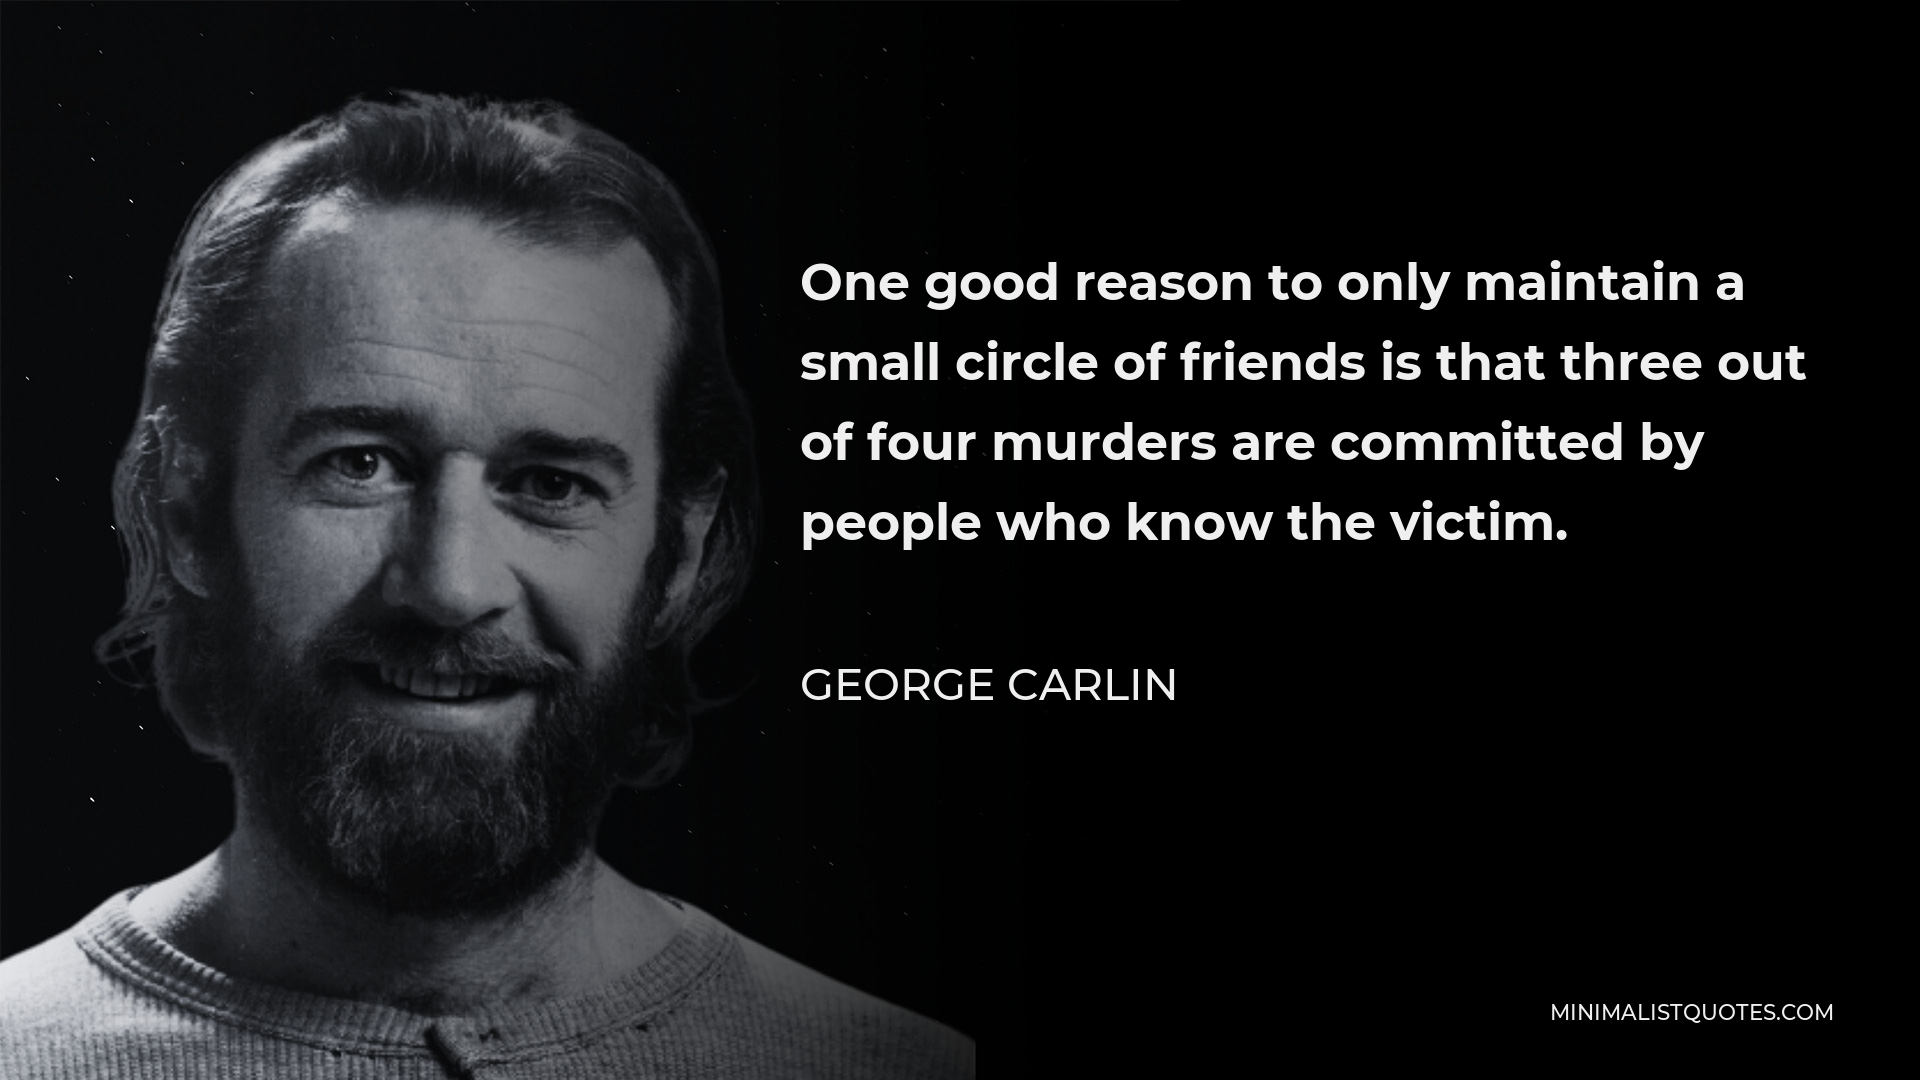 George Carlin Quote - One good reason to only maintain a small circle of friends is that three out of four murders are committed by people who know the victim.